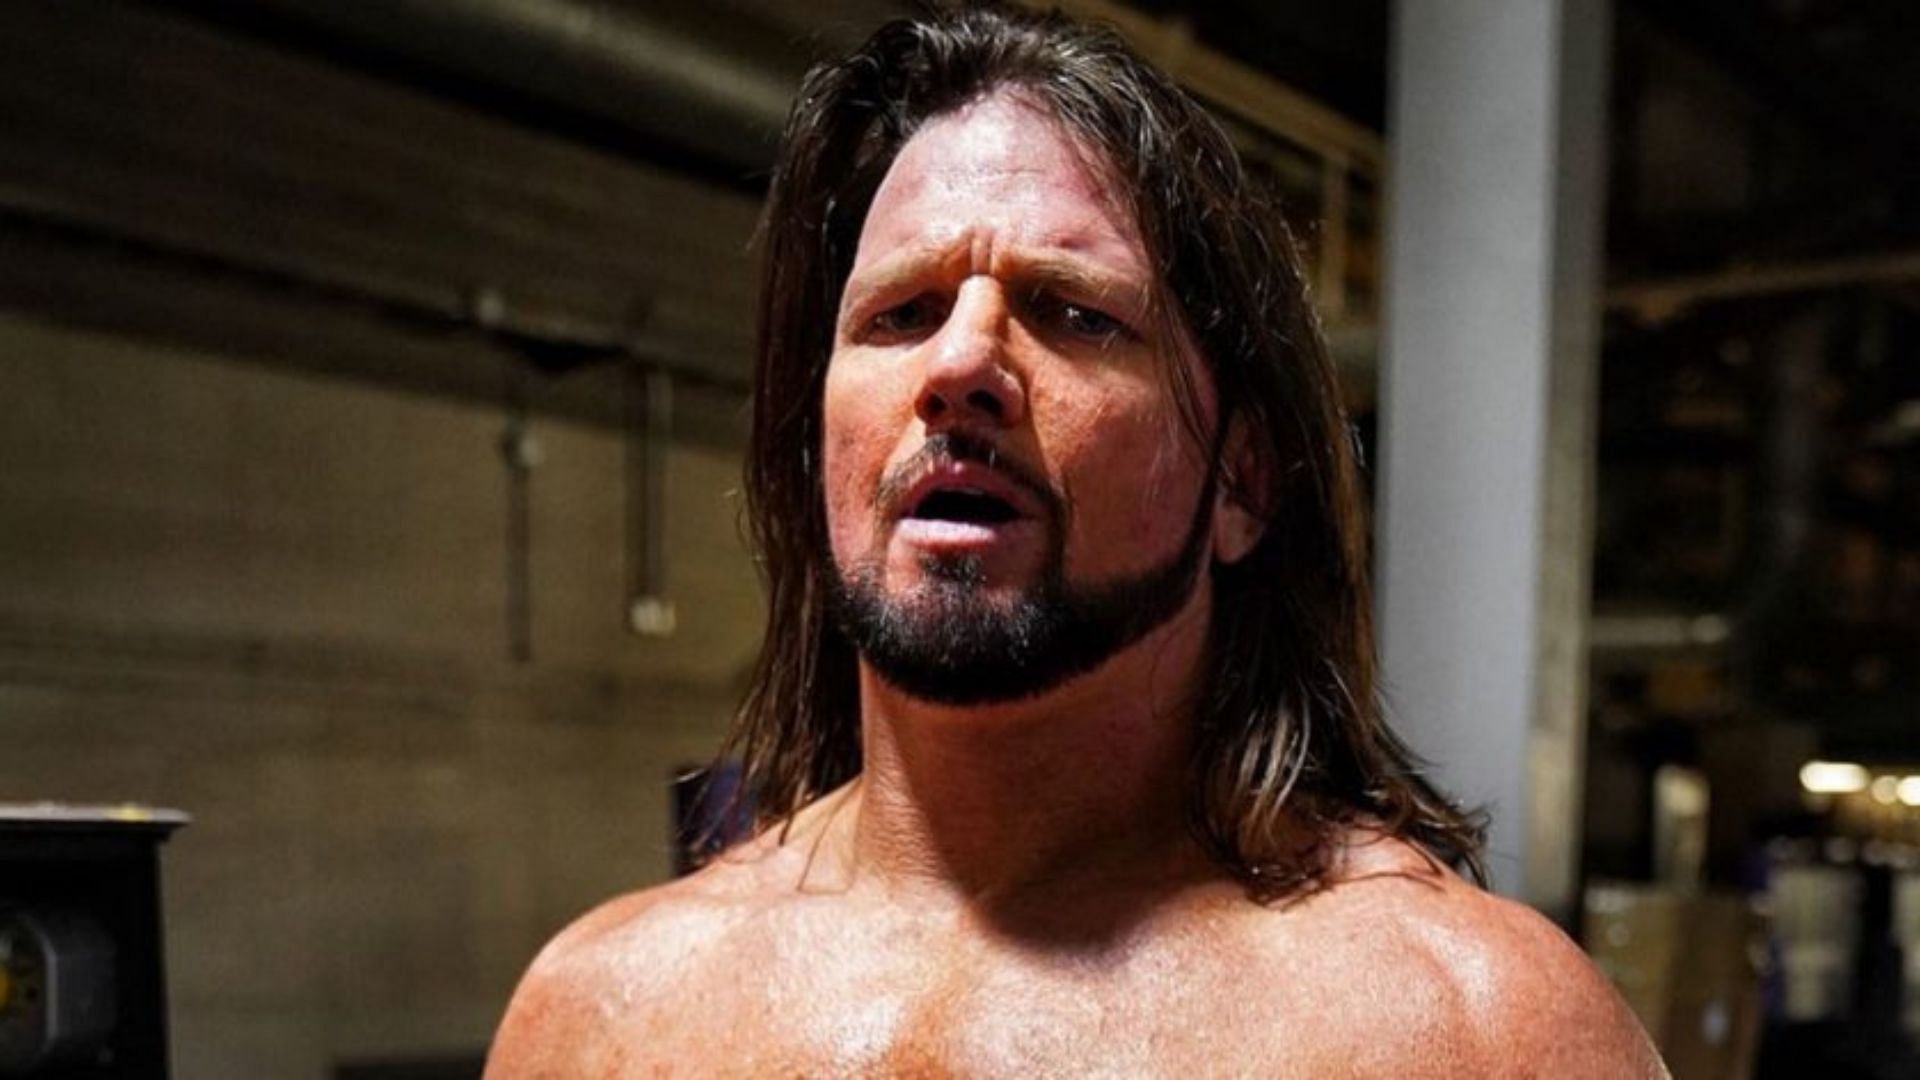 AJ Styles was offered a spot in The Judgment Day by Finn Balor